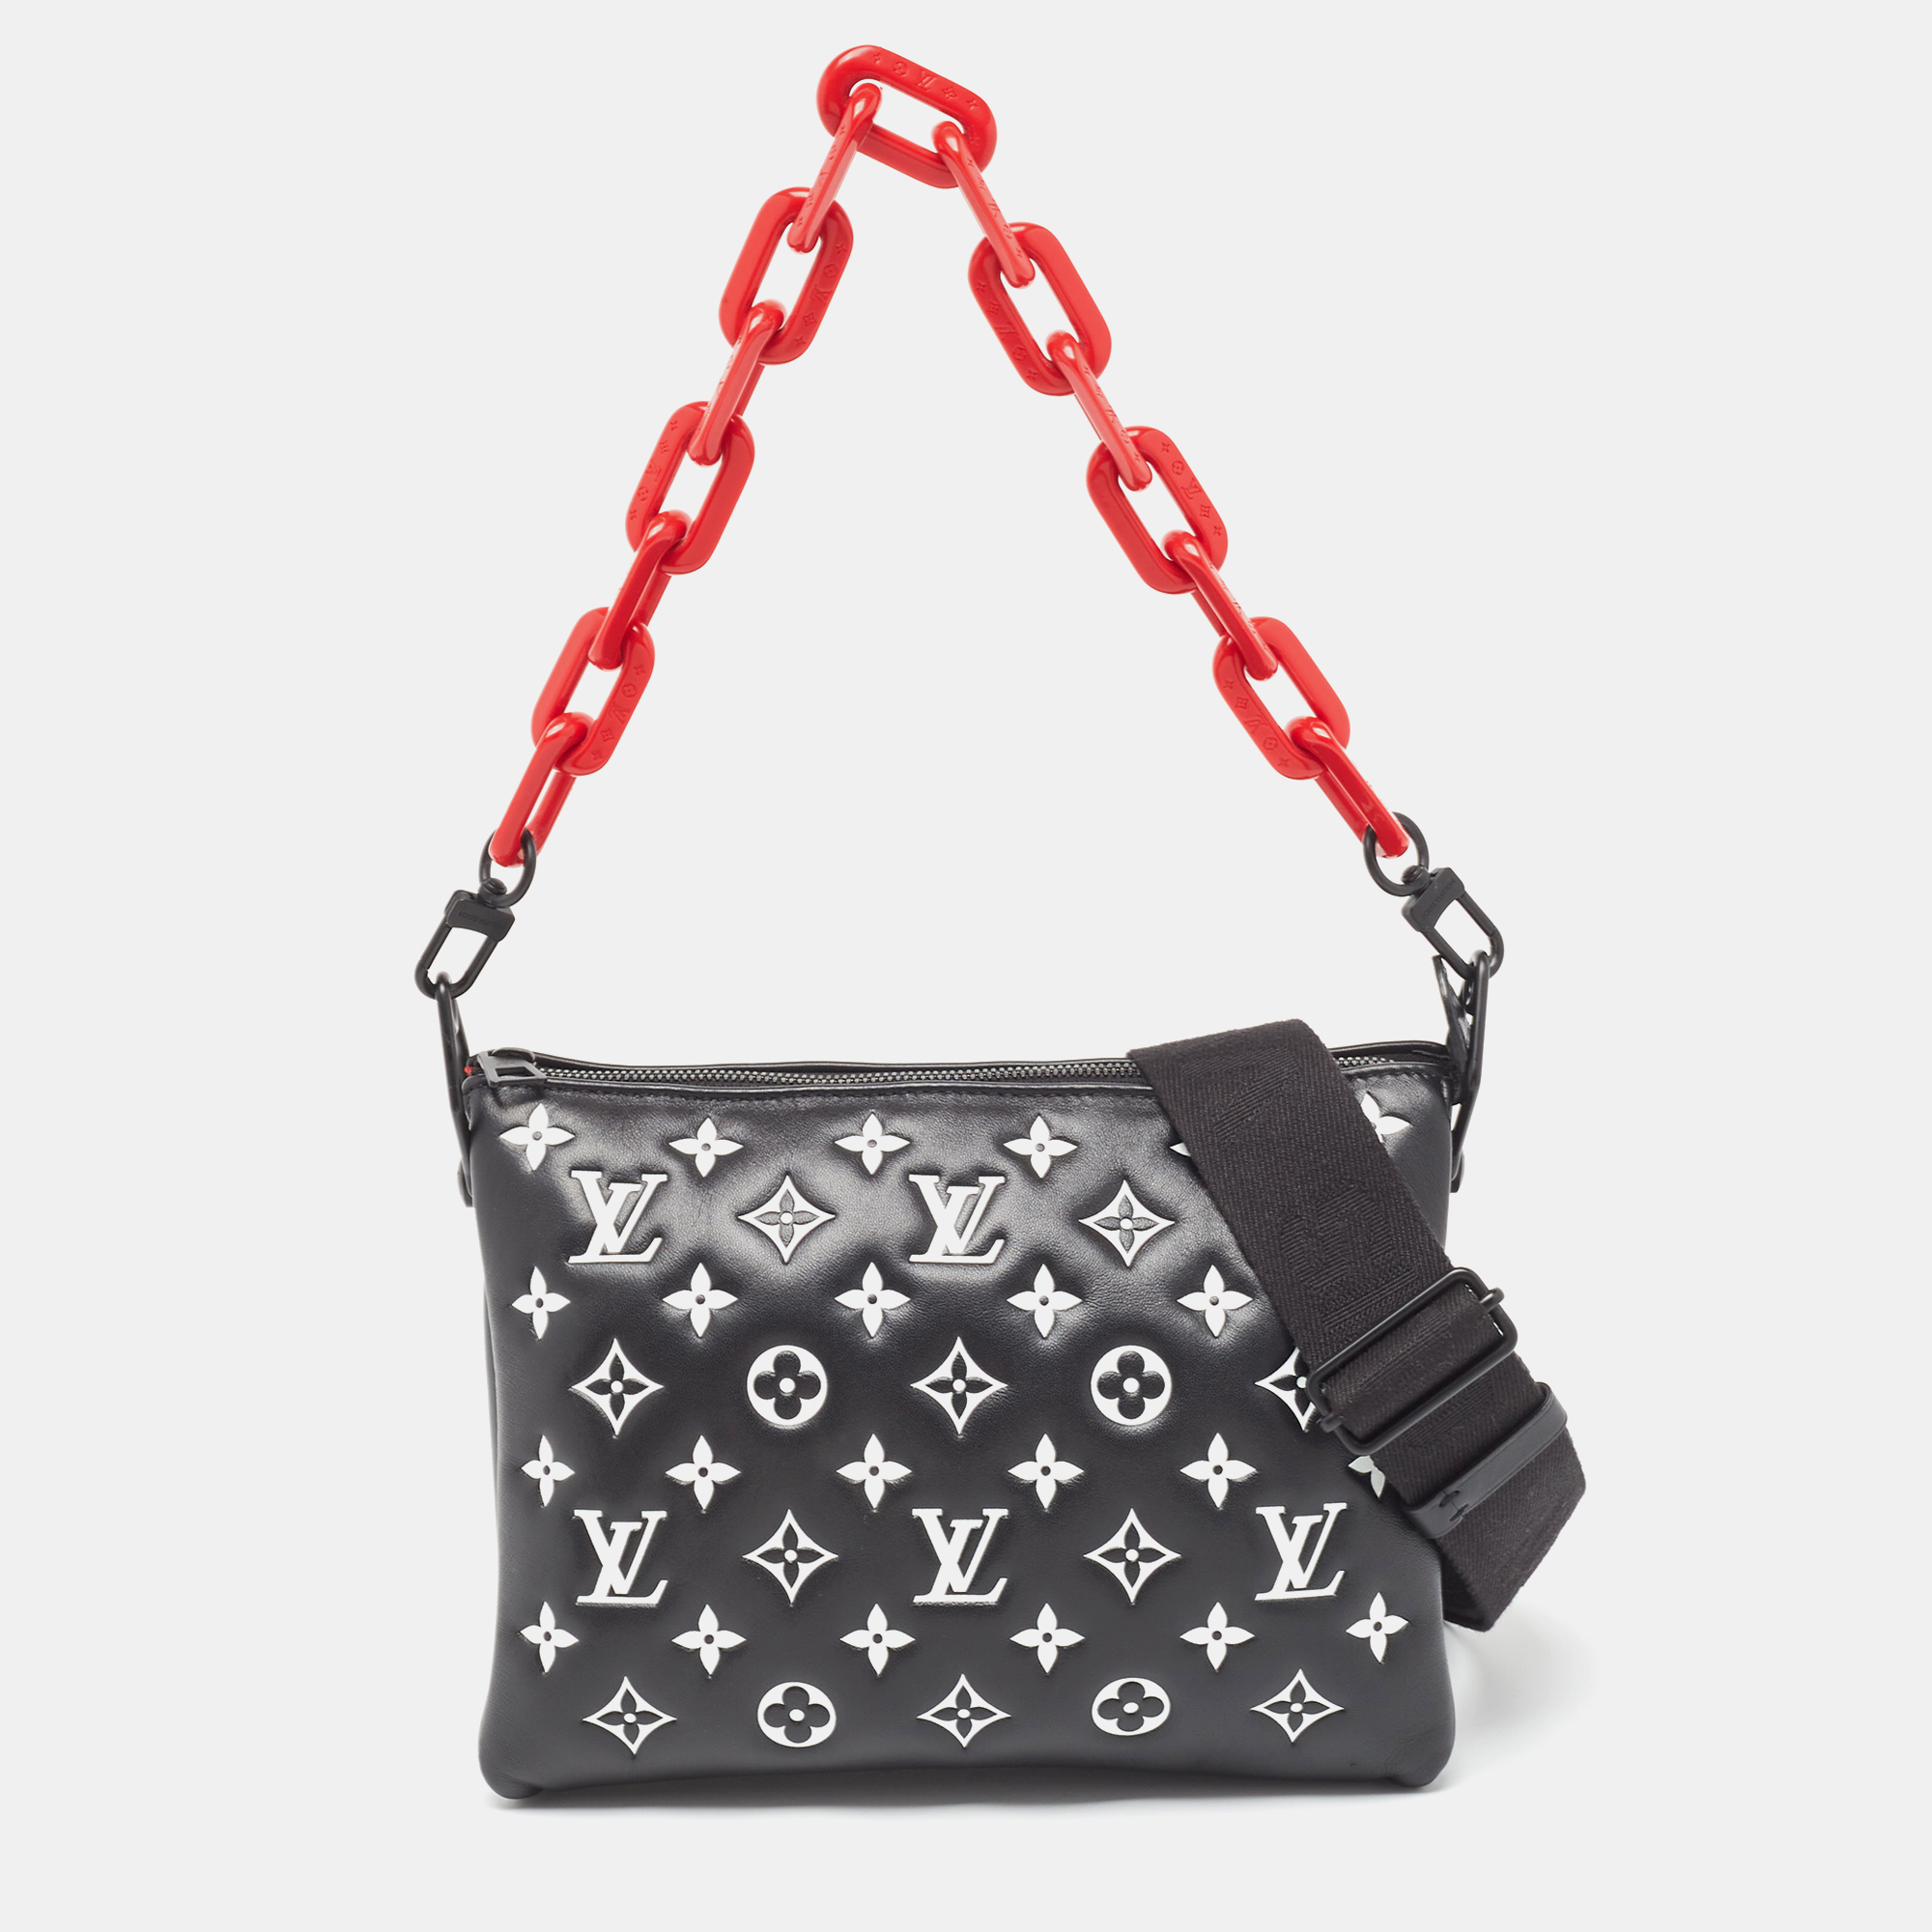 Louis Vuitton Black/White Monogram Embossed Leather Coussin PM Bag